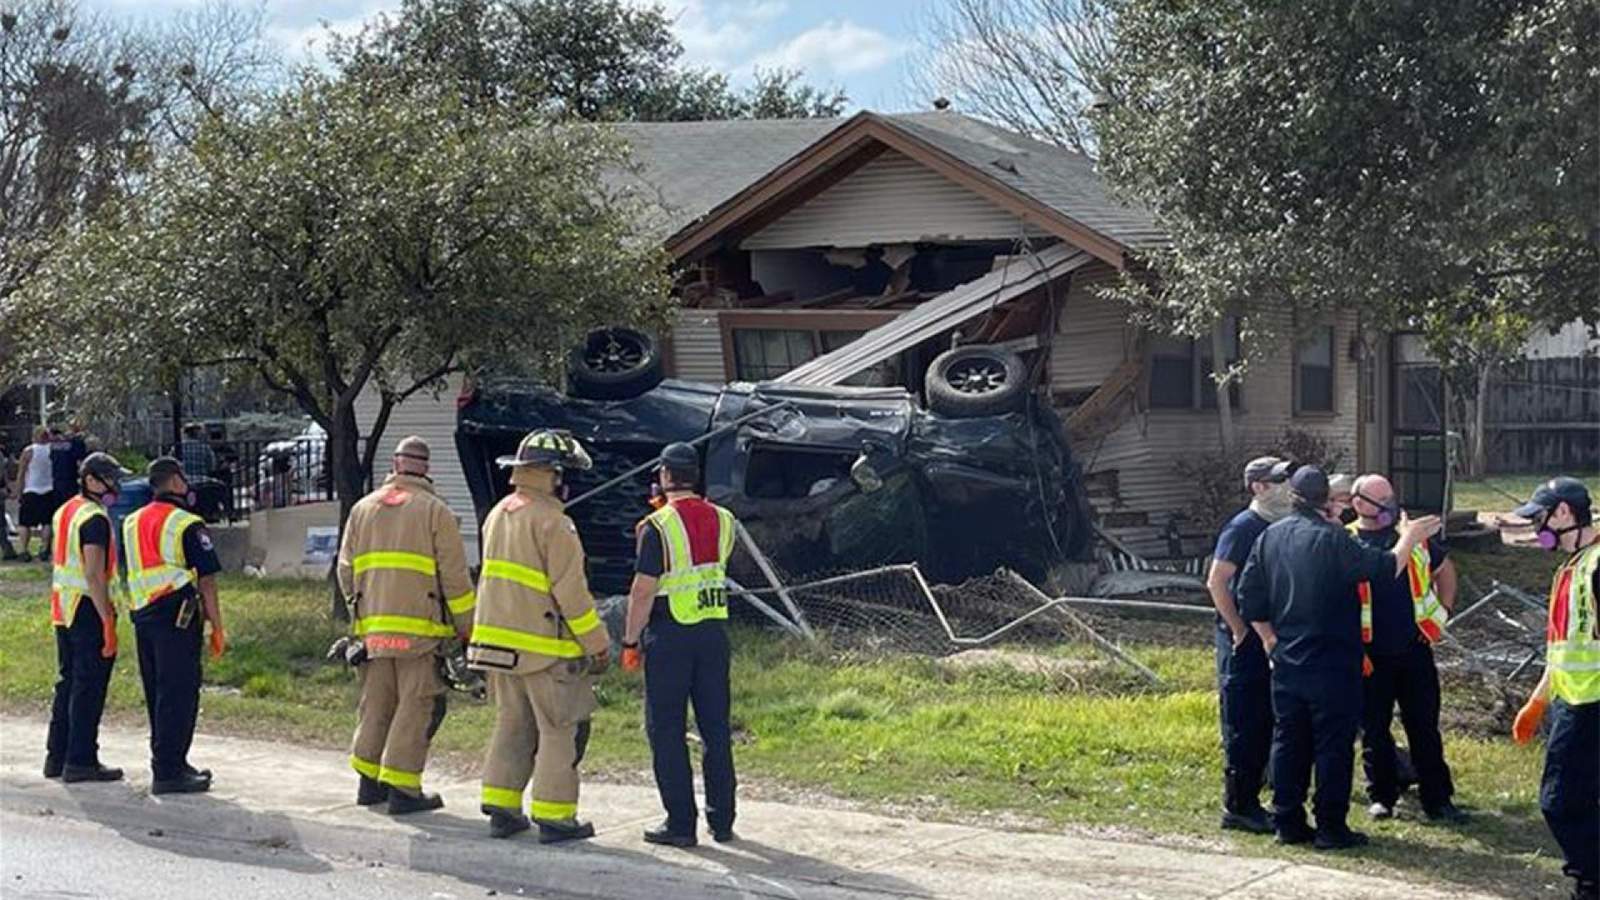 Driver fleeing from DPS reached 100 mph before crashing into home, troopers say